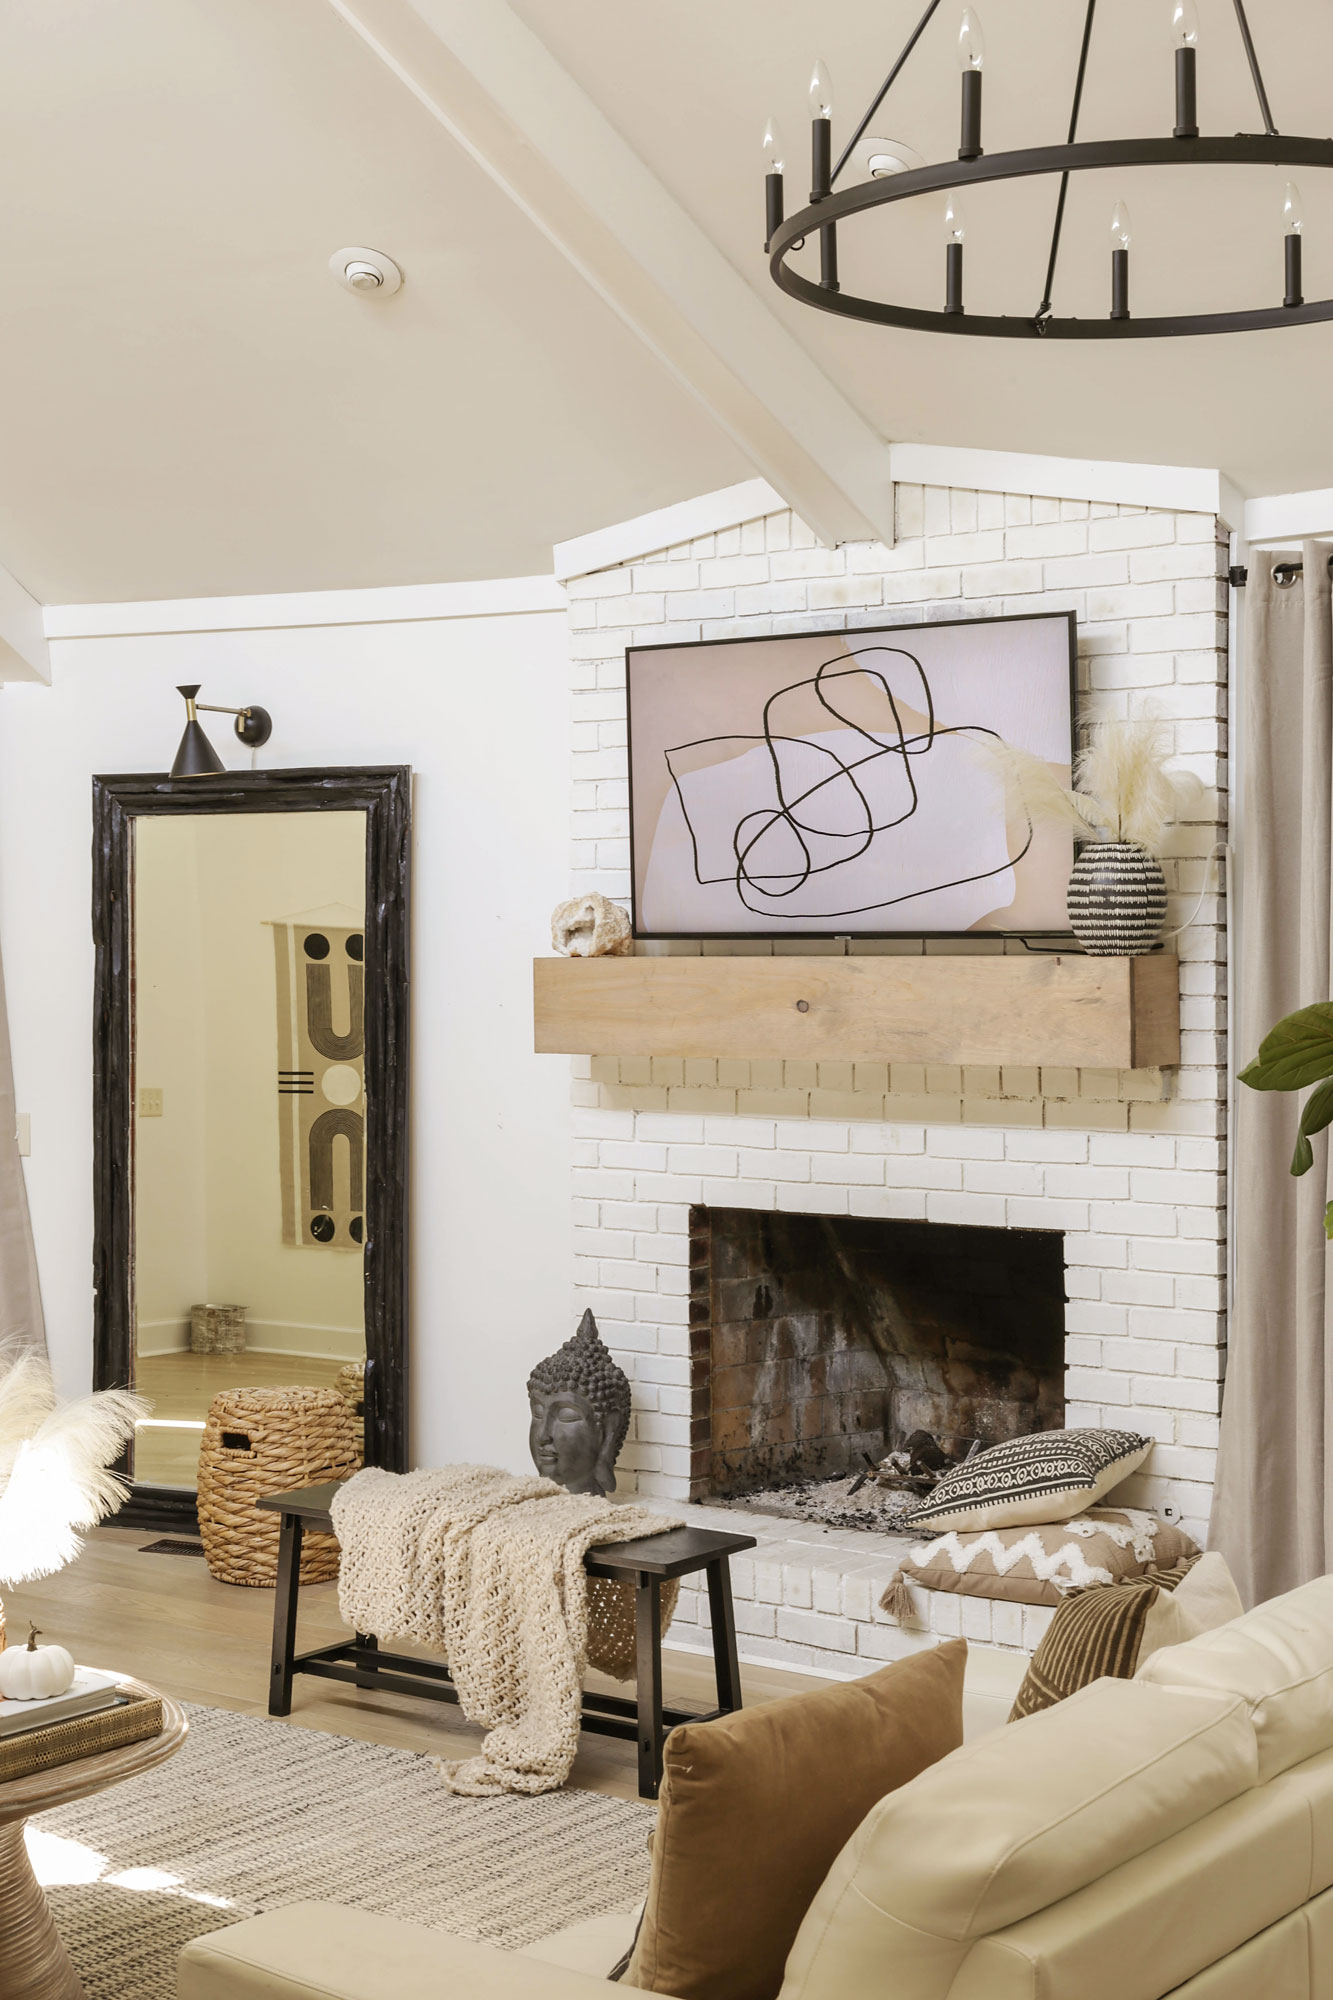 How to Mount a TV Over a Brick Fireplace (and Hide the Wires) - Designing  Vibes - Interior Design, DIY and Lifestyle